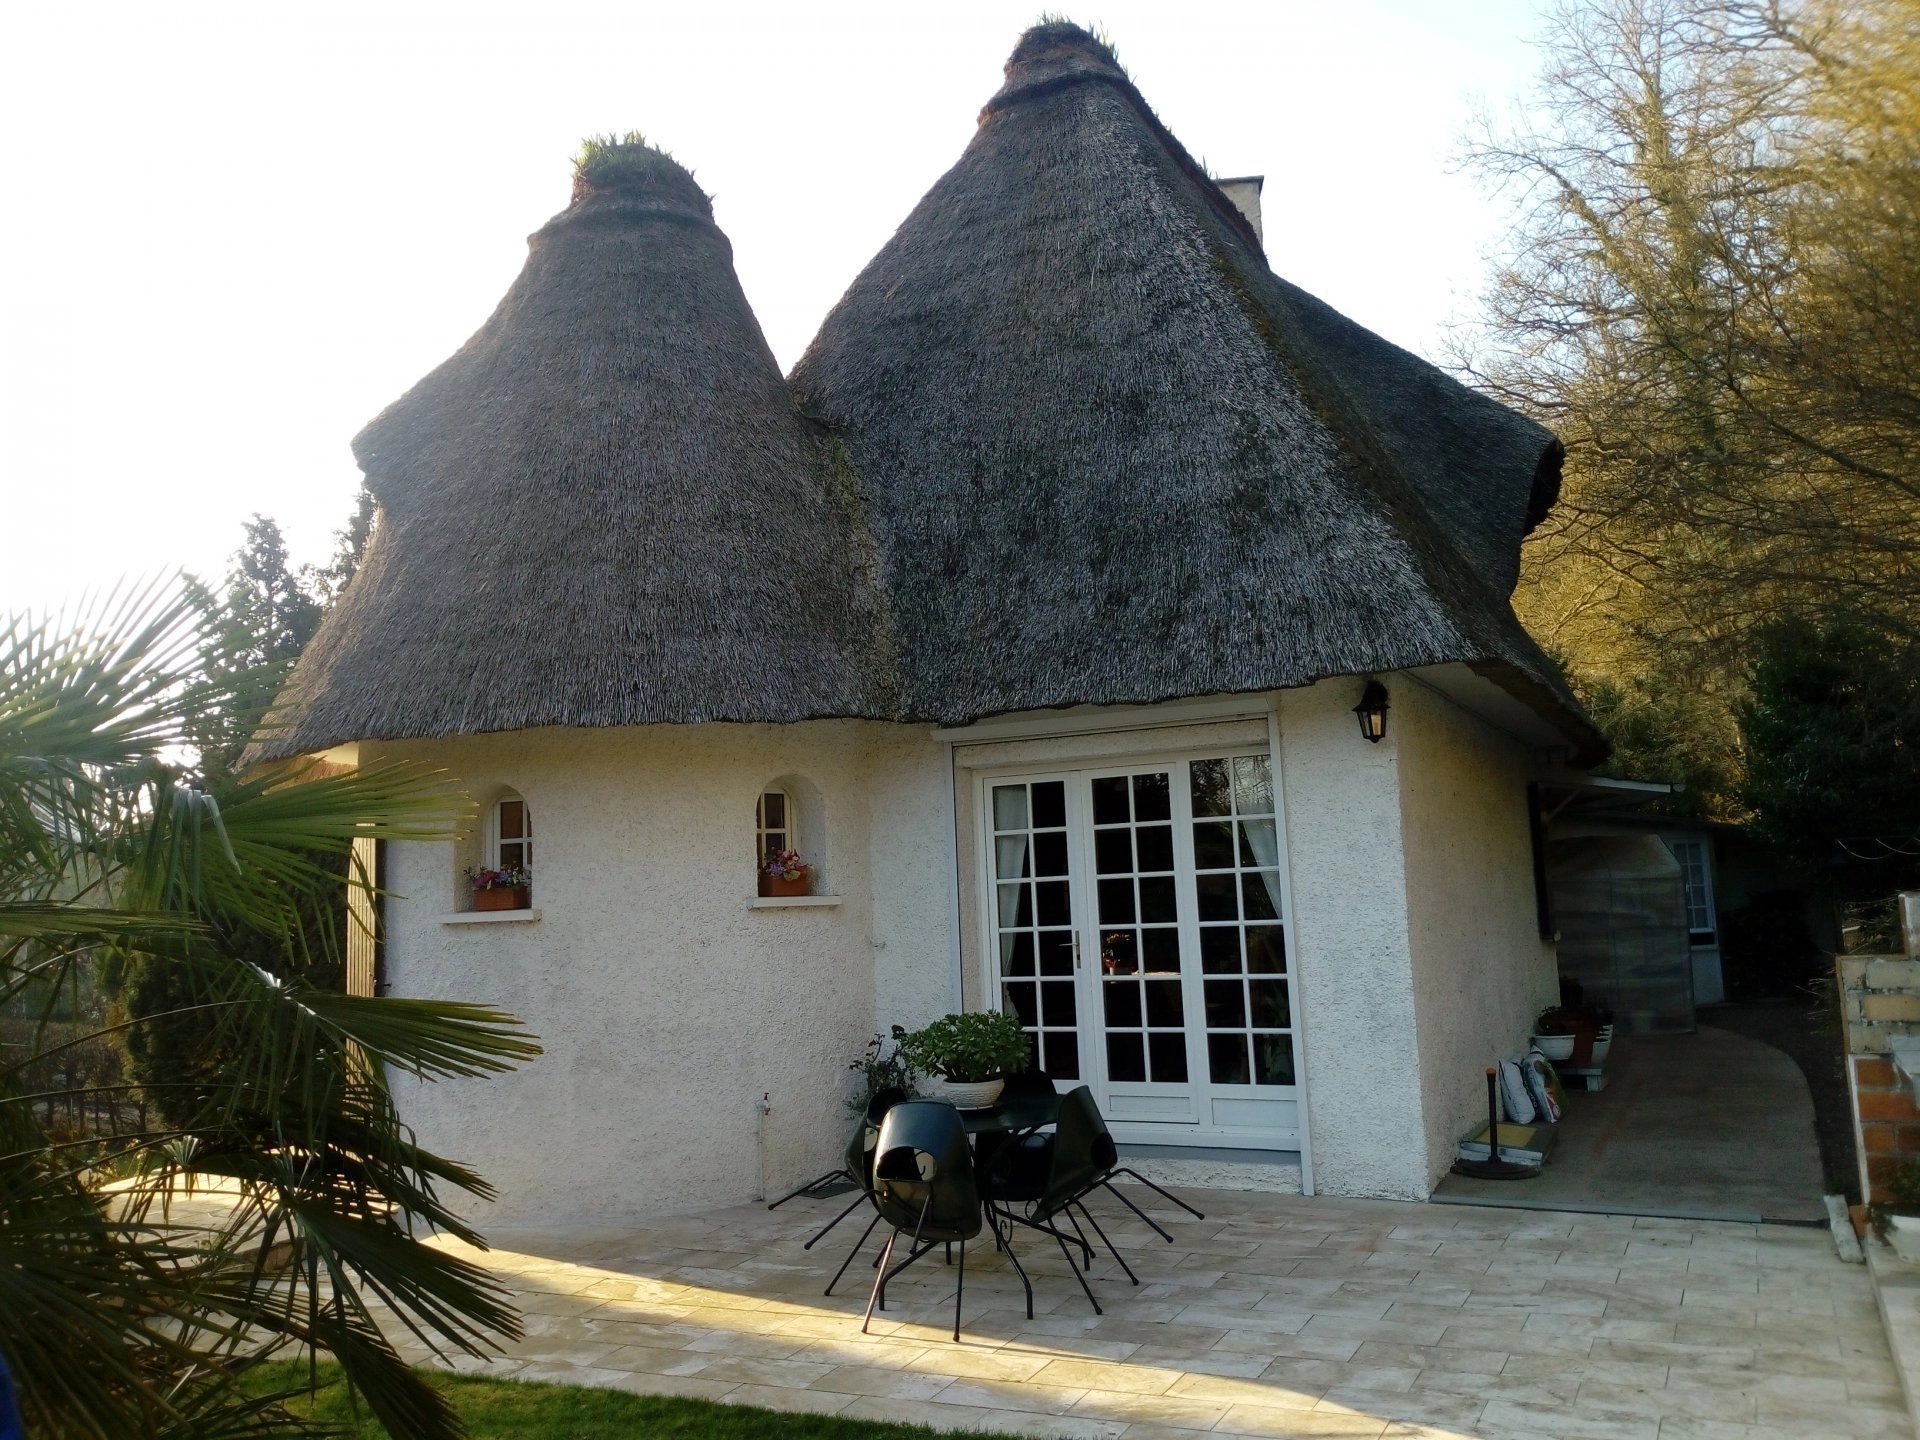 Exceptional 3 bedroom Thatched-Roof house in St Cyr la Campagne de Pasquier ( Normandy)